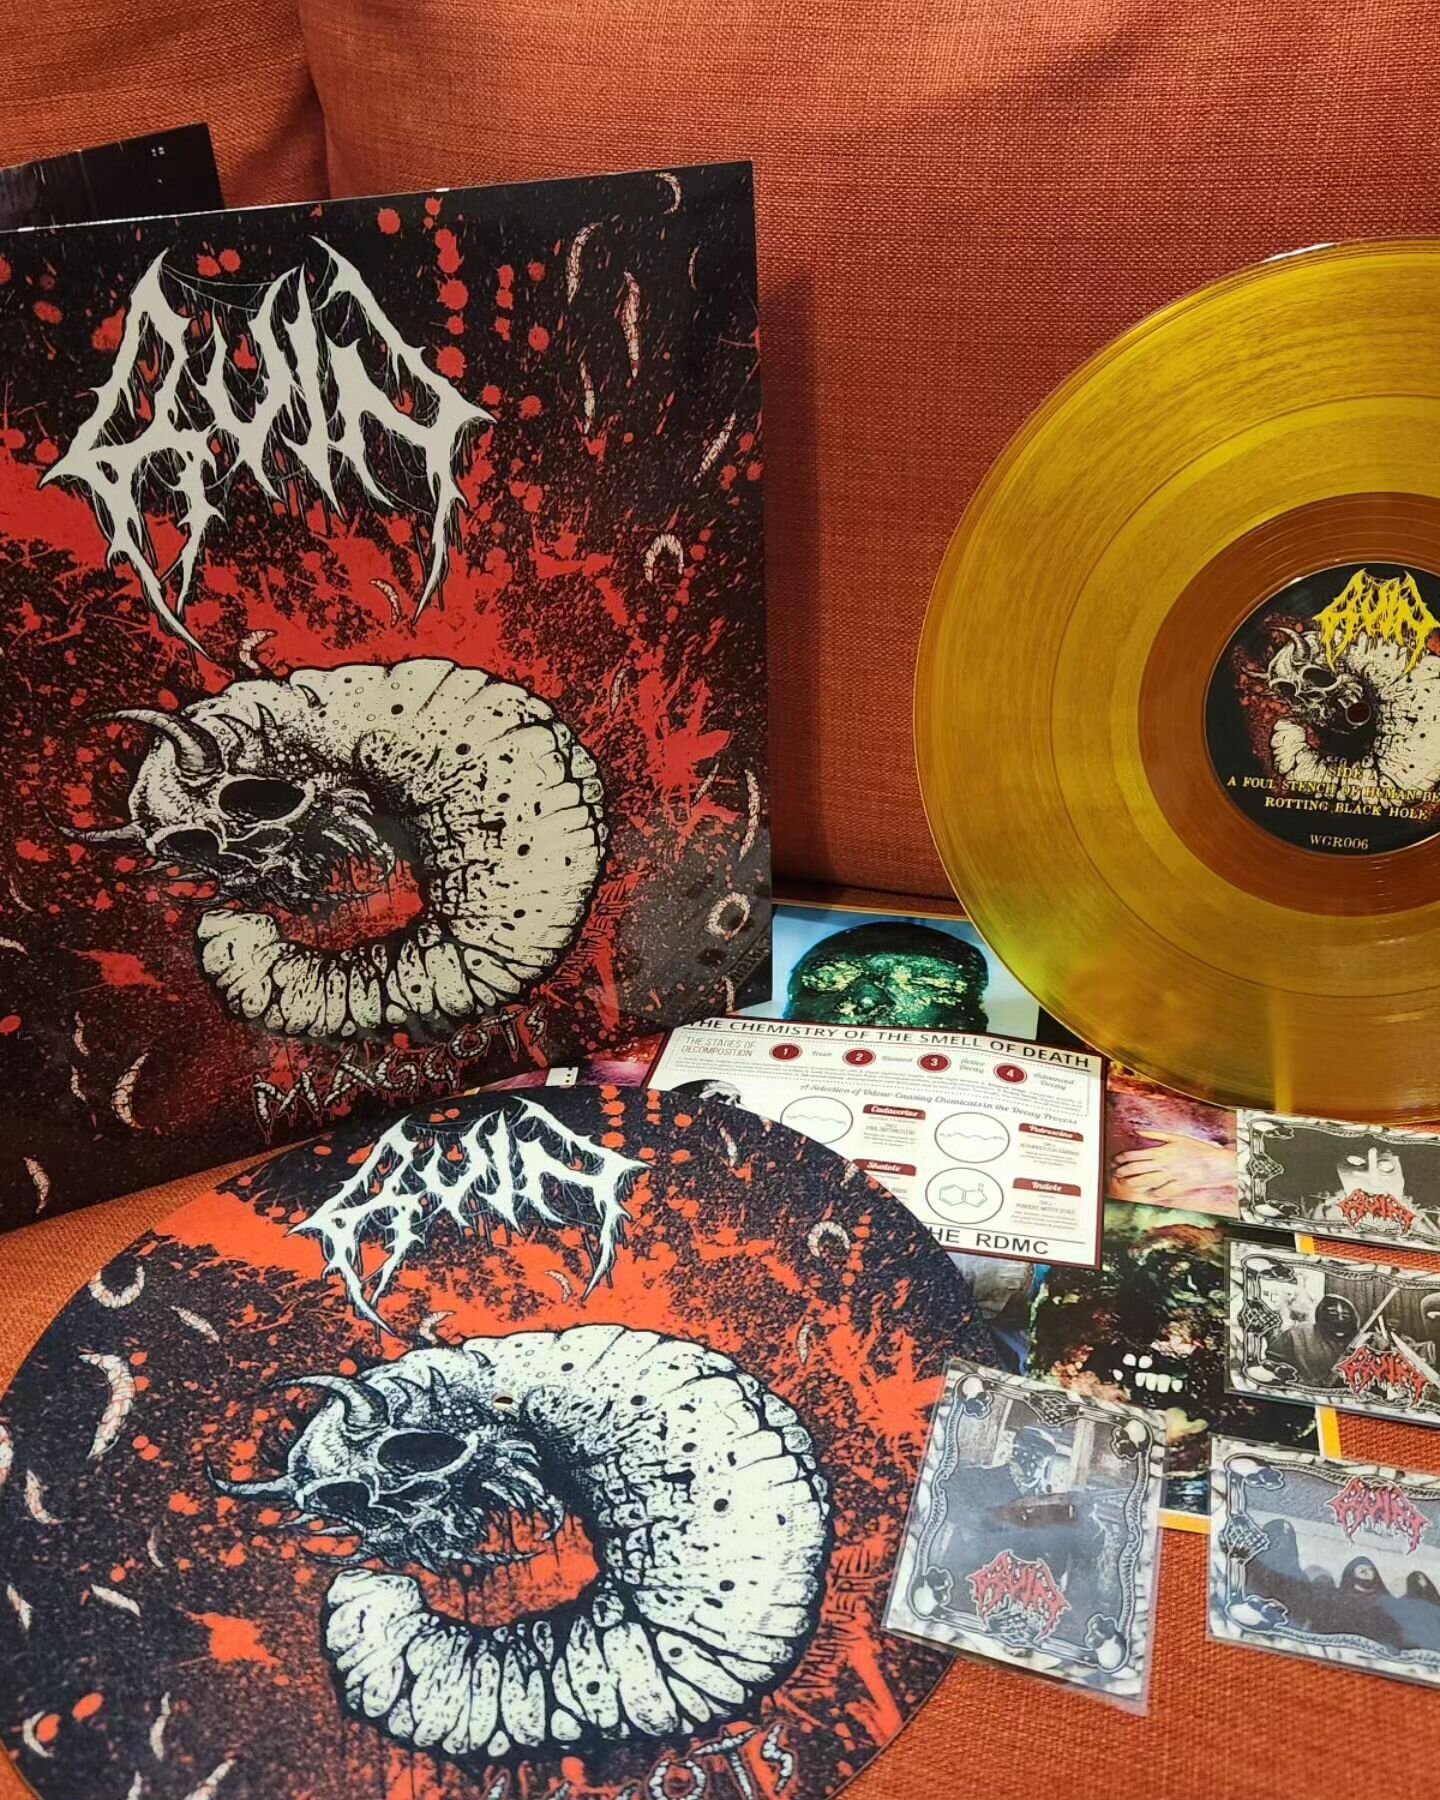 AVAILABLE NOW AT WISEGRINDSRECORDS.COM

- RUIN - Maggots Special Edition 180g 12&quot;MLP
(Package contains gatefold jacket, insert/poster, 180g colored vinyl, premium quality turntable slipmat, and 4 piece RDMC trading card set)

- SHITBRAINS / YxAx